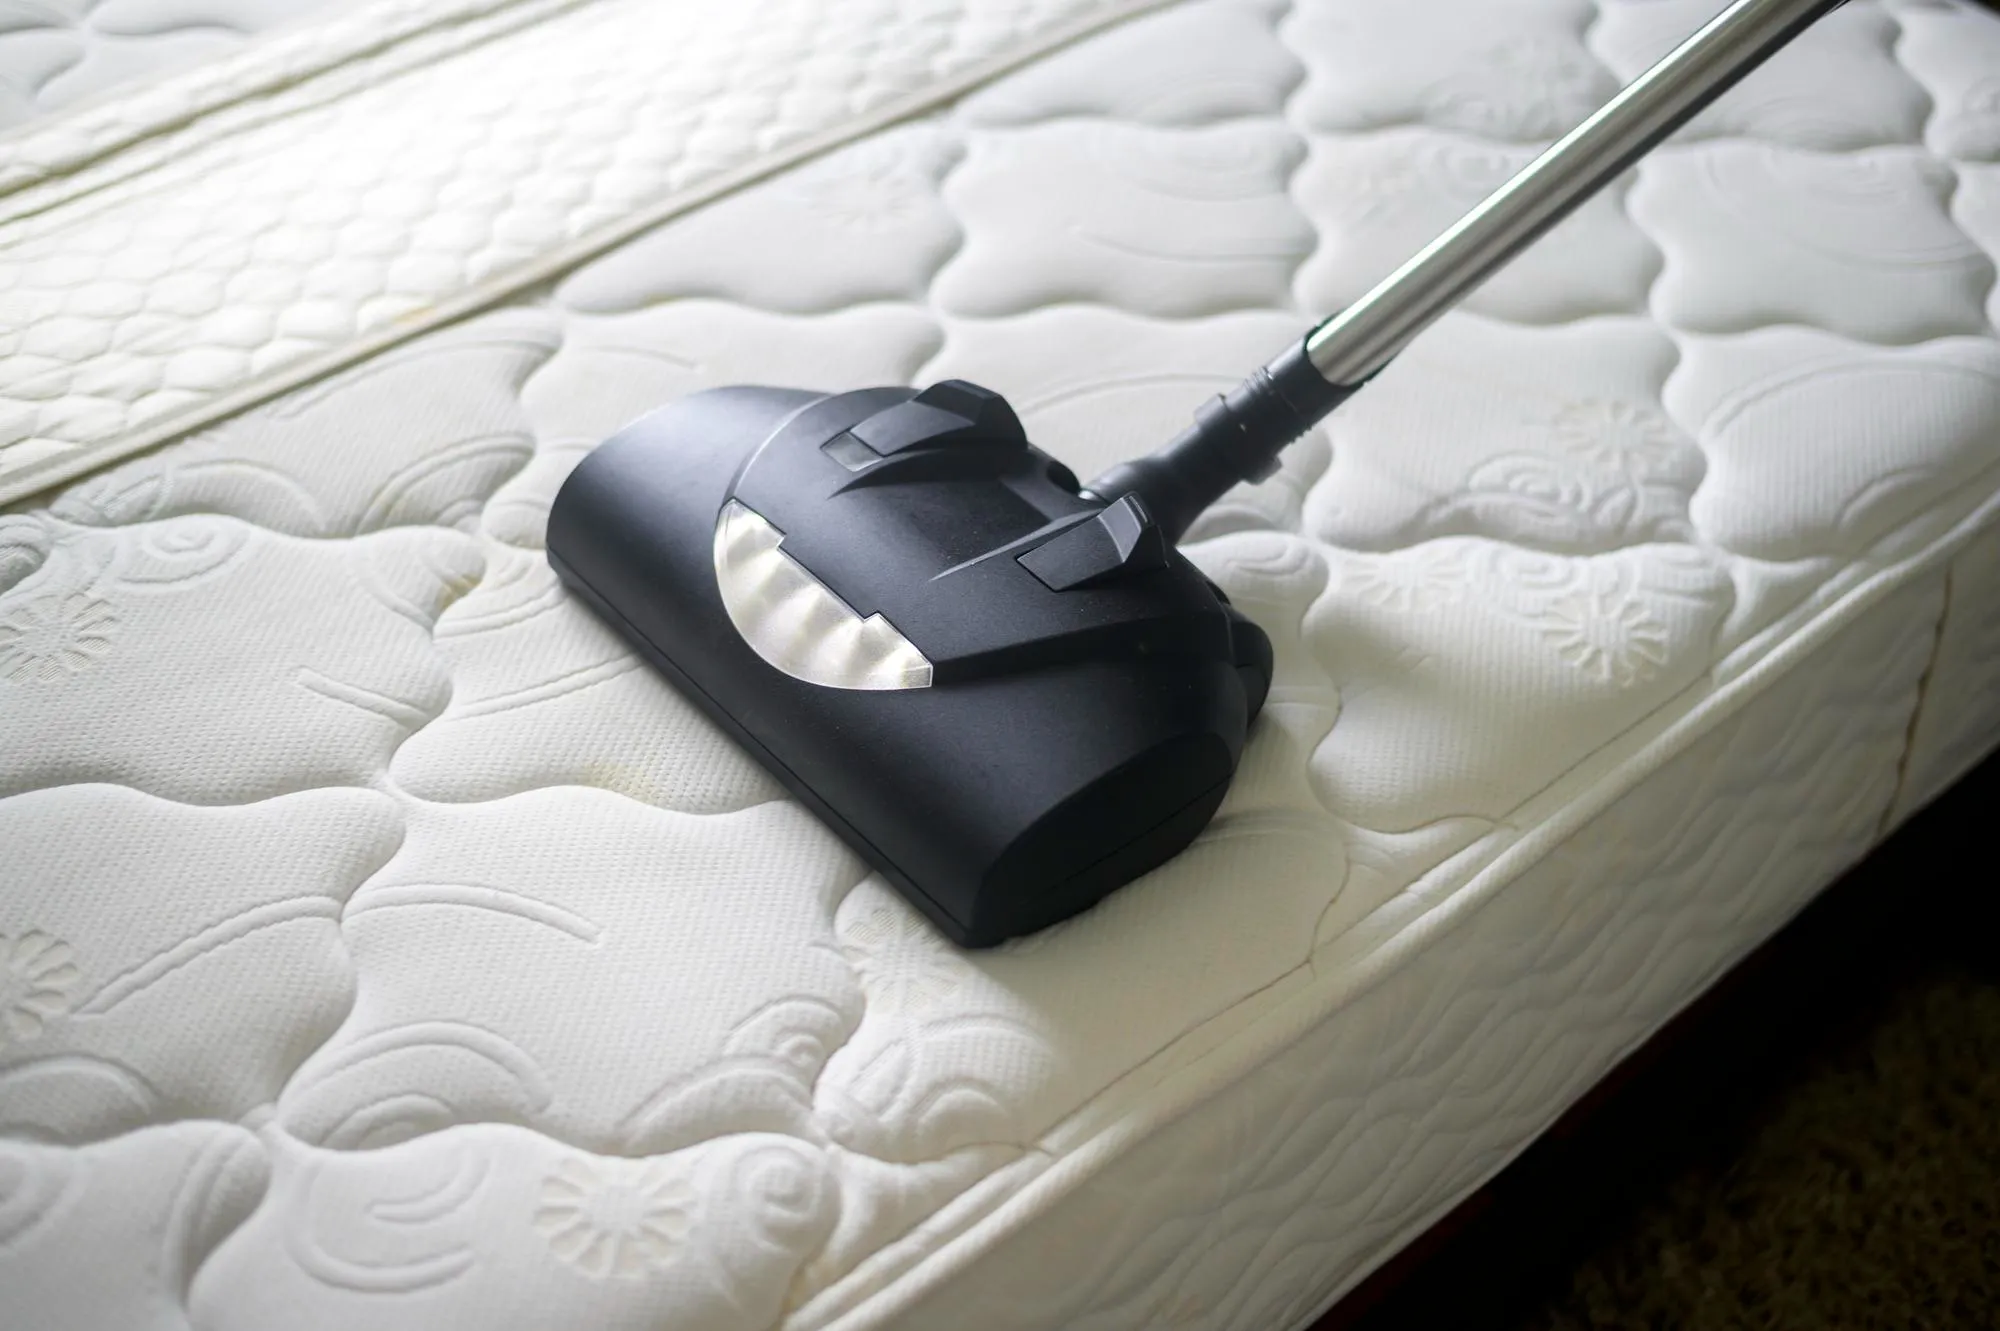 Mattress Cleaning Services in Nanaimo